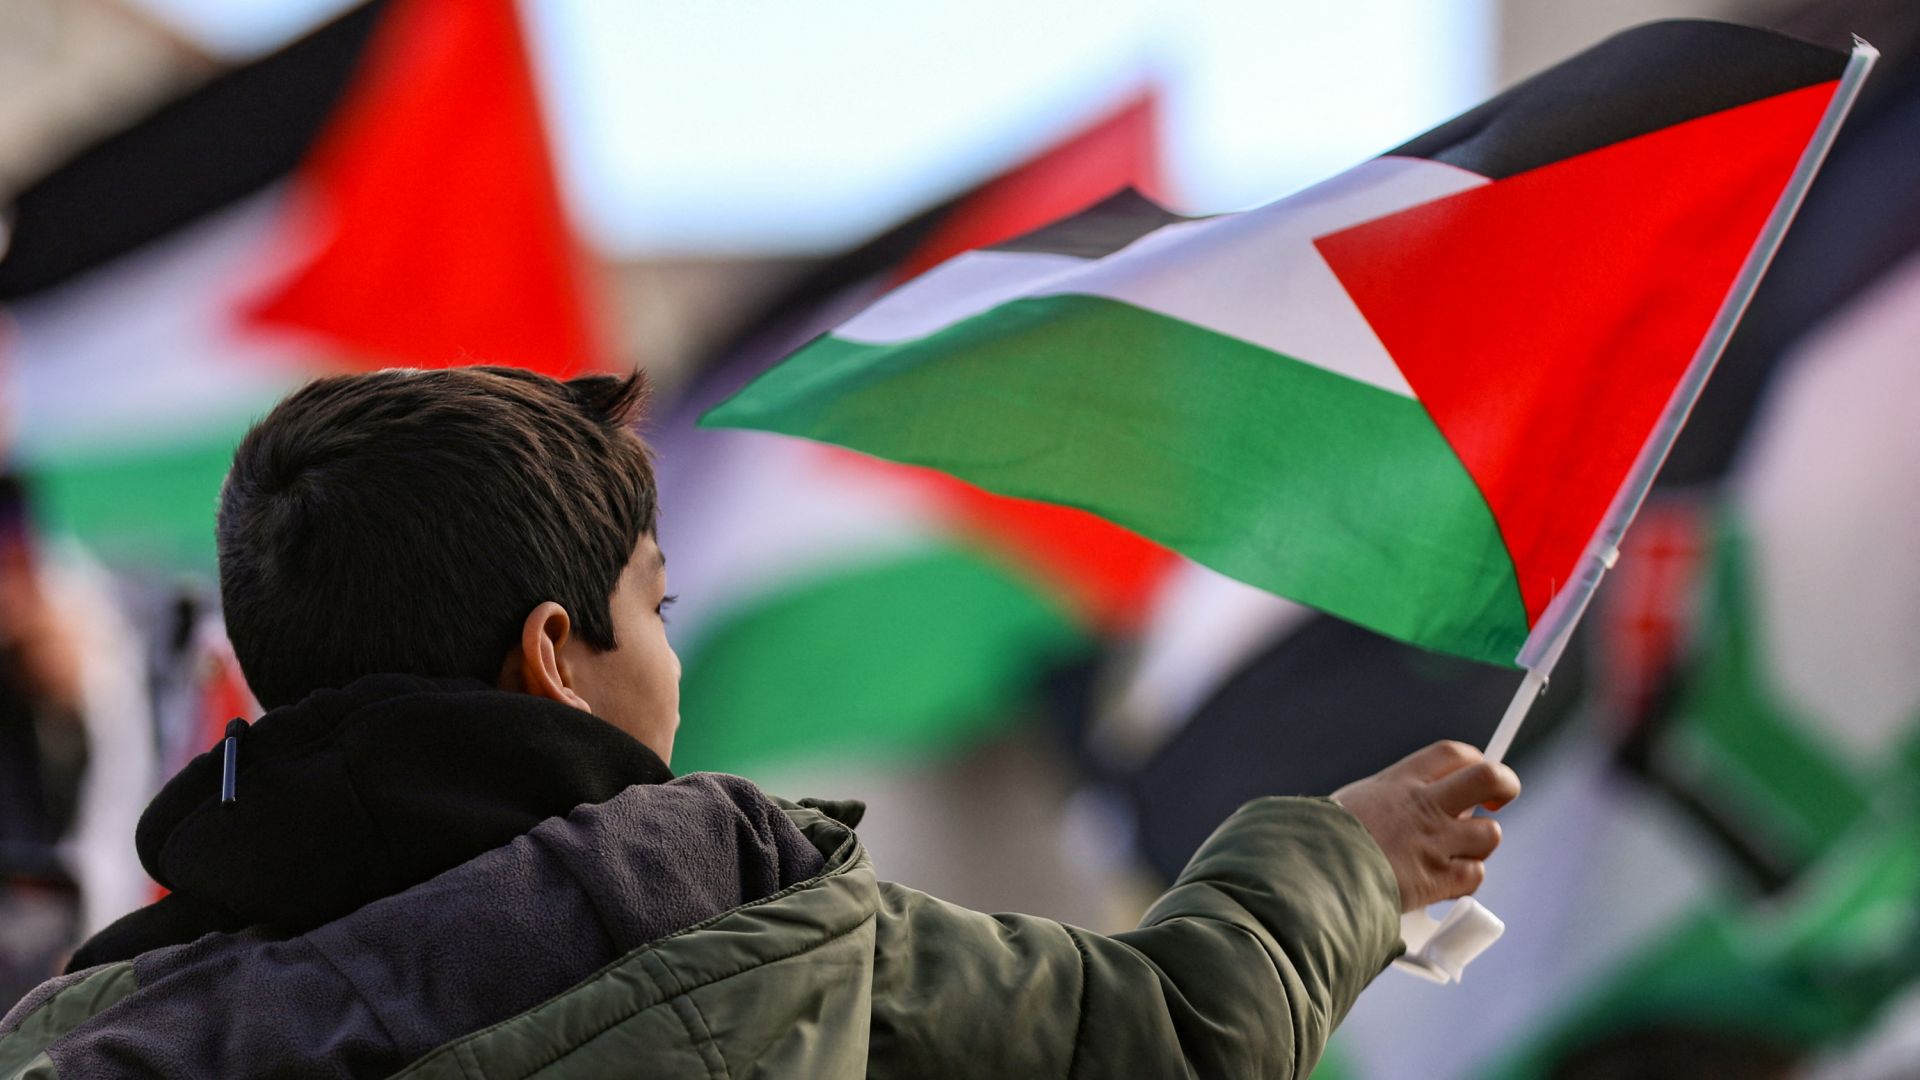 A boy holds a Palestinian flag during a march for Gaza, in Washington, DC